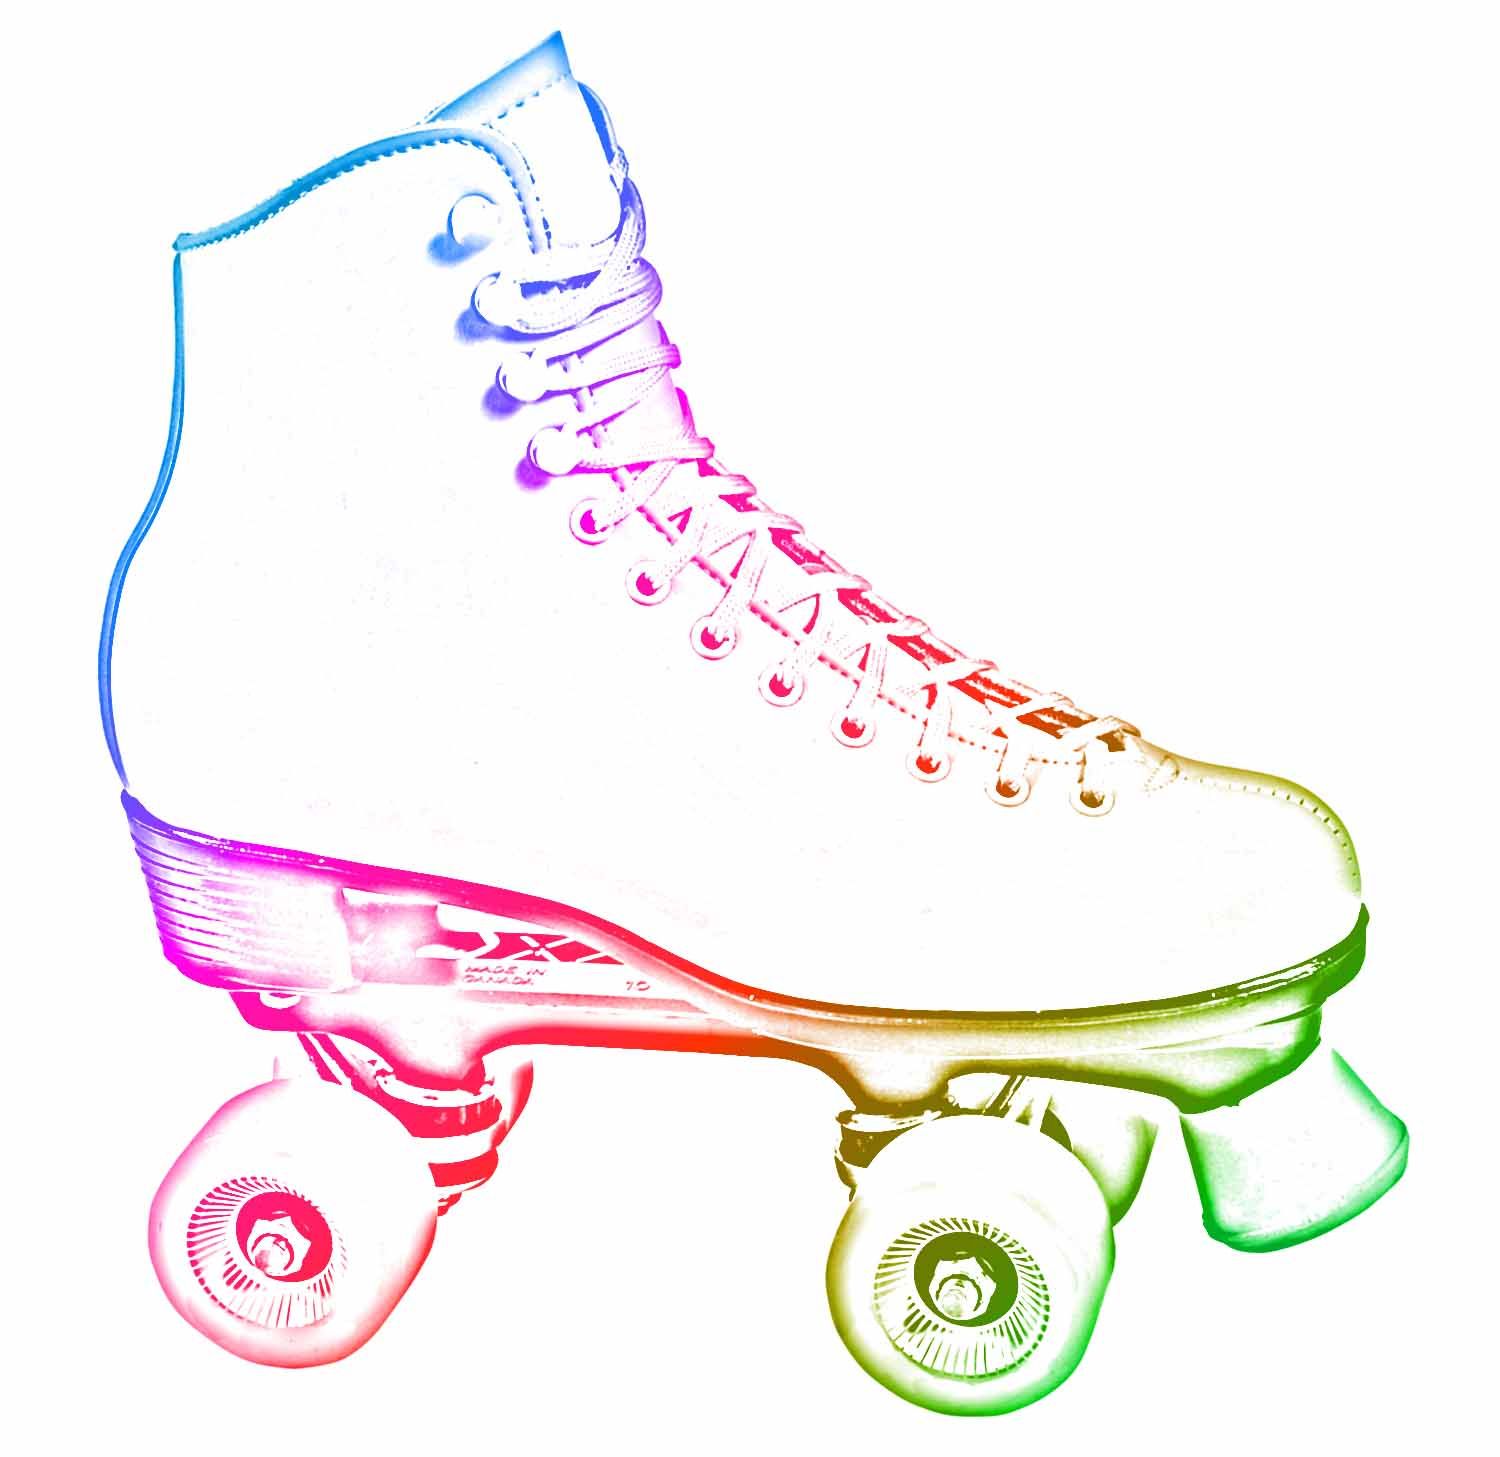 This Is Why We Made A List Of Roller Skating Crafts That Will Help You Extend The The Life Of Your Skates And Keep The Fun Alive. - Roller Skates, Transparent background PNG HD thumbnail